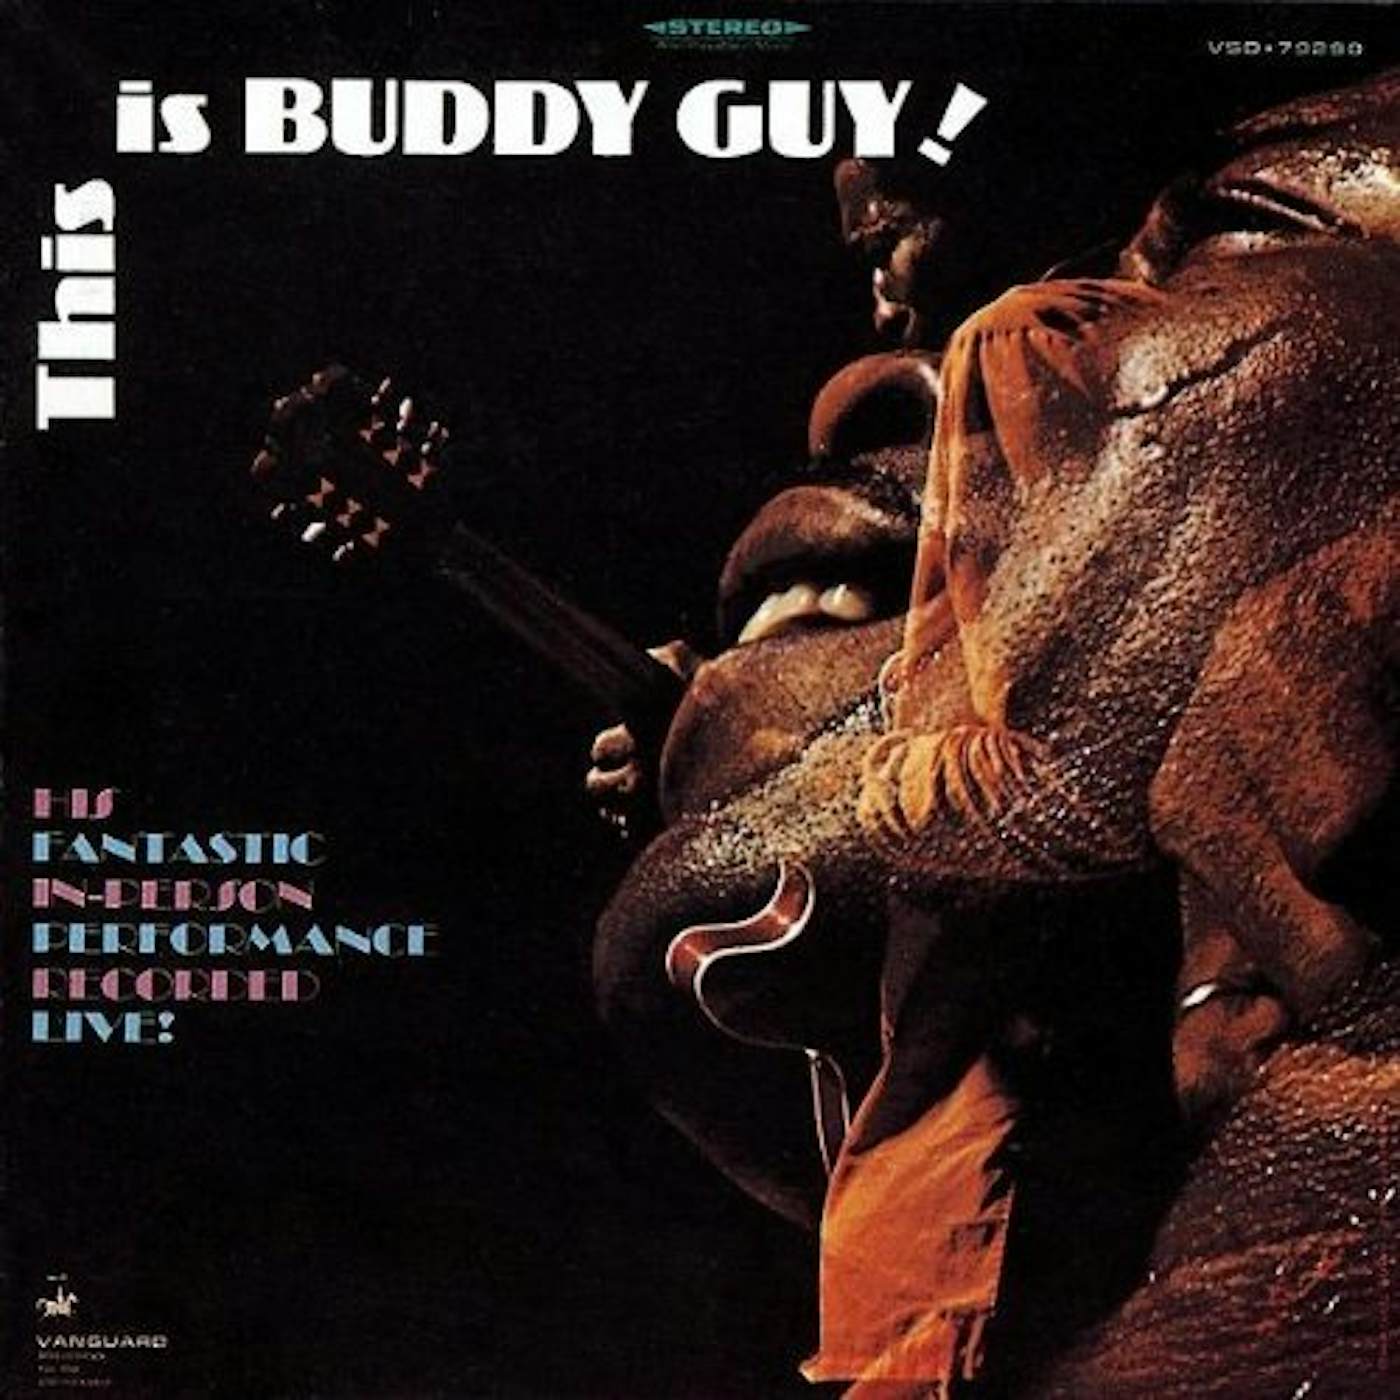 THIS IS BUDDY GUY CD